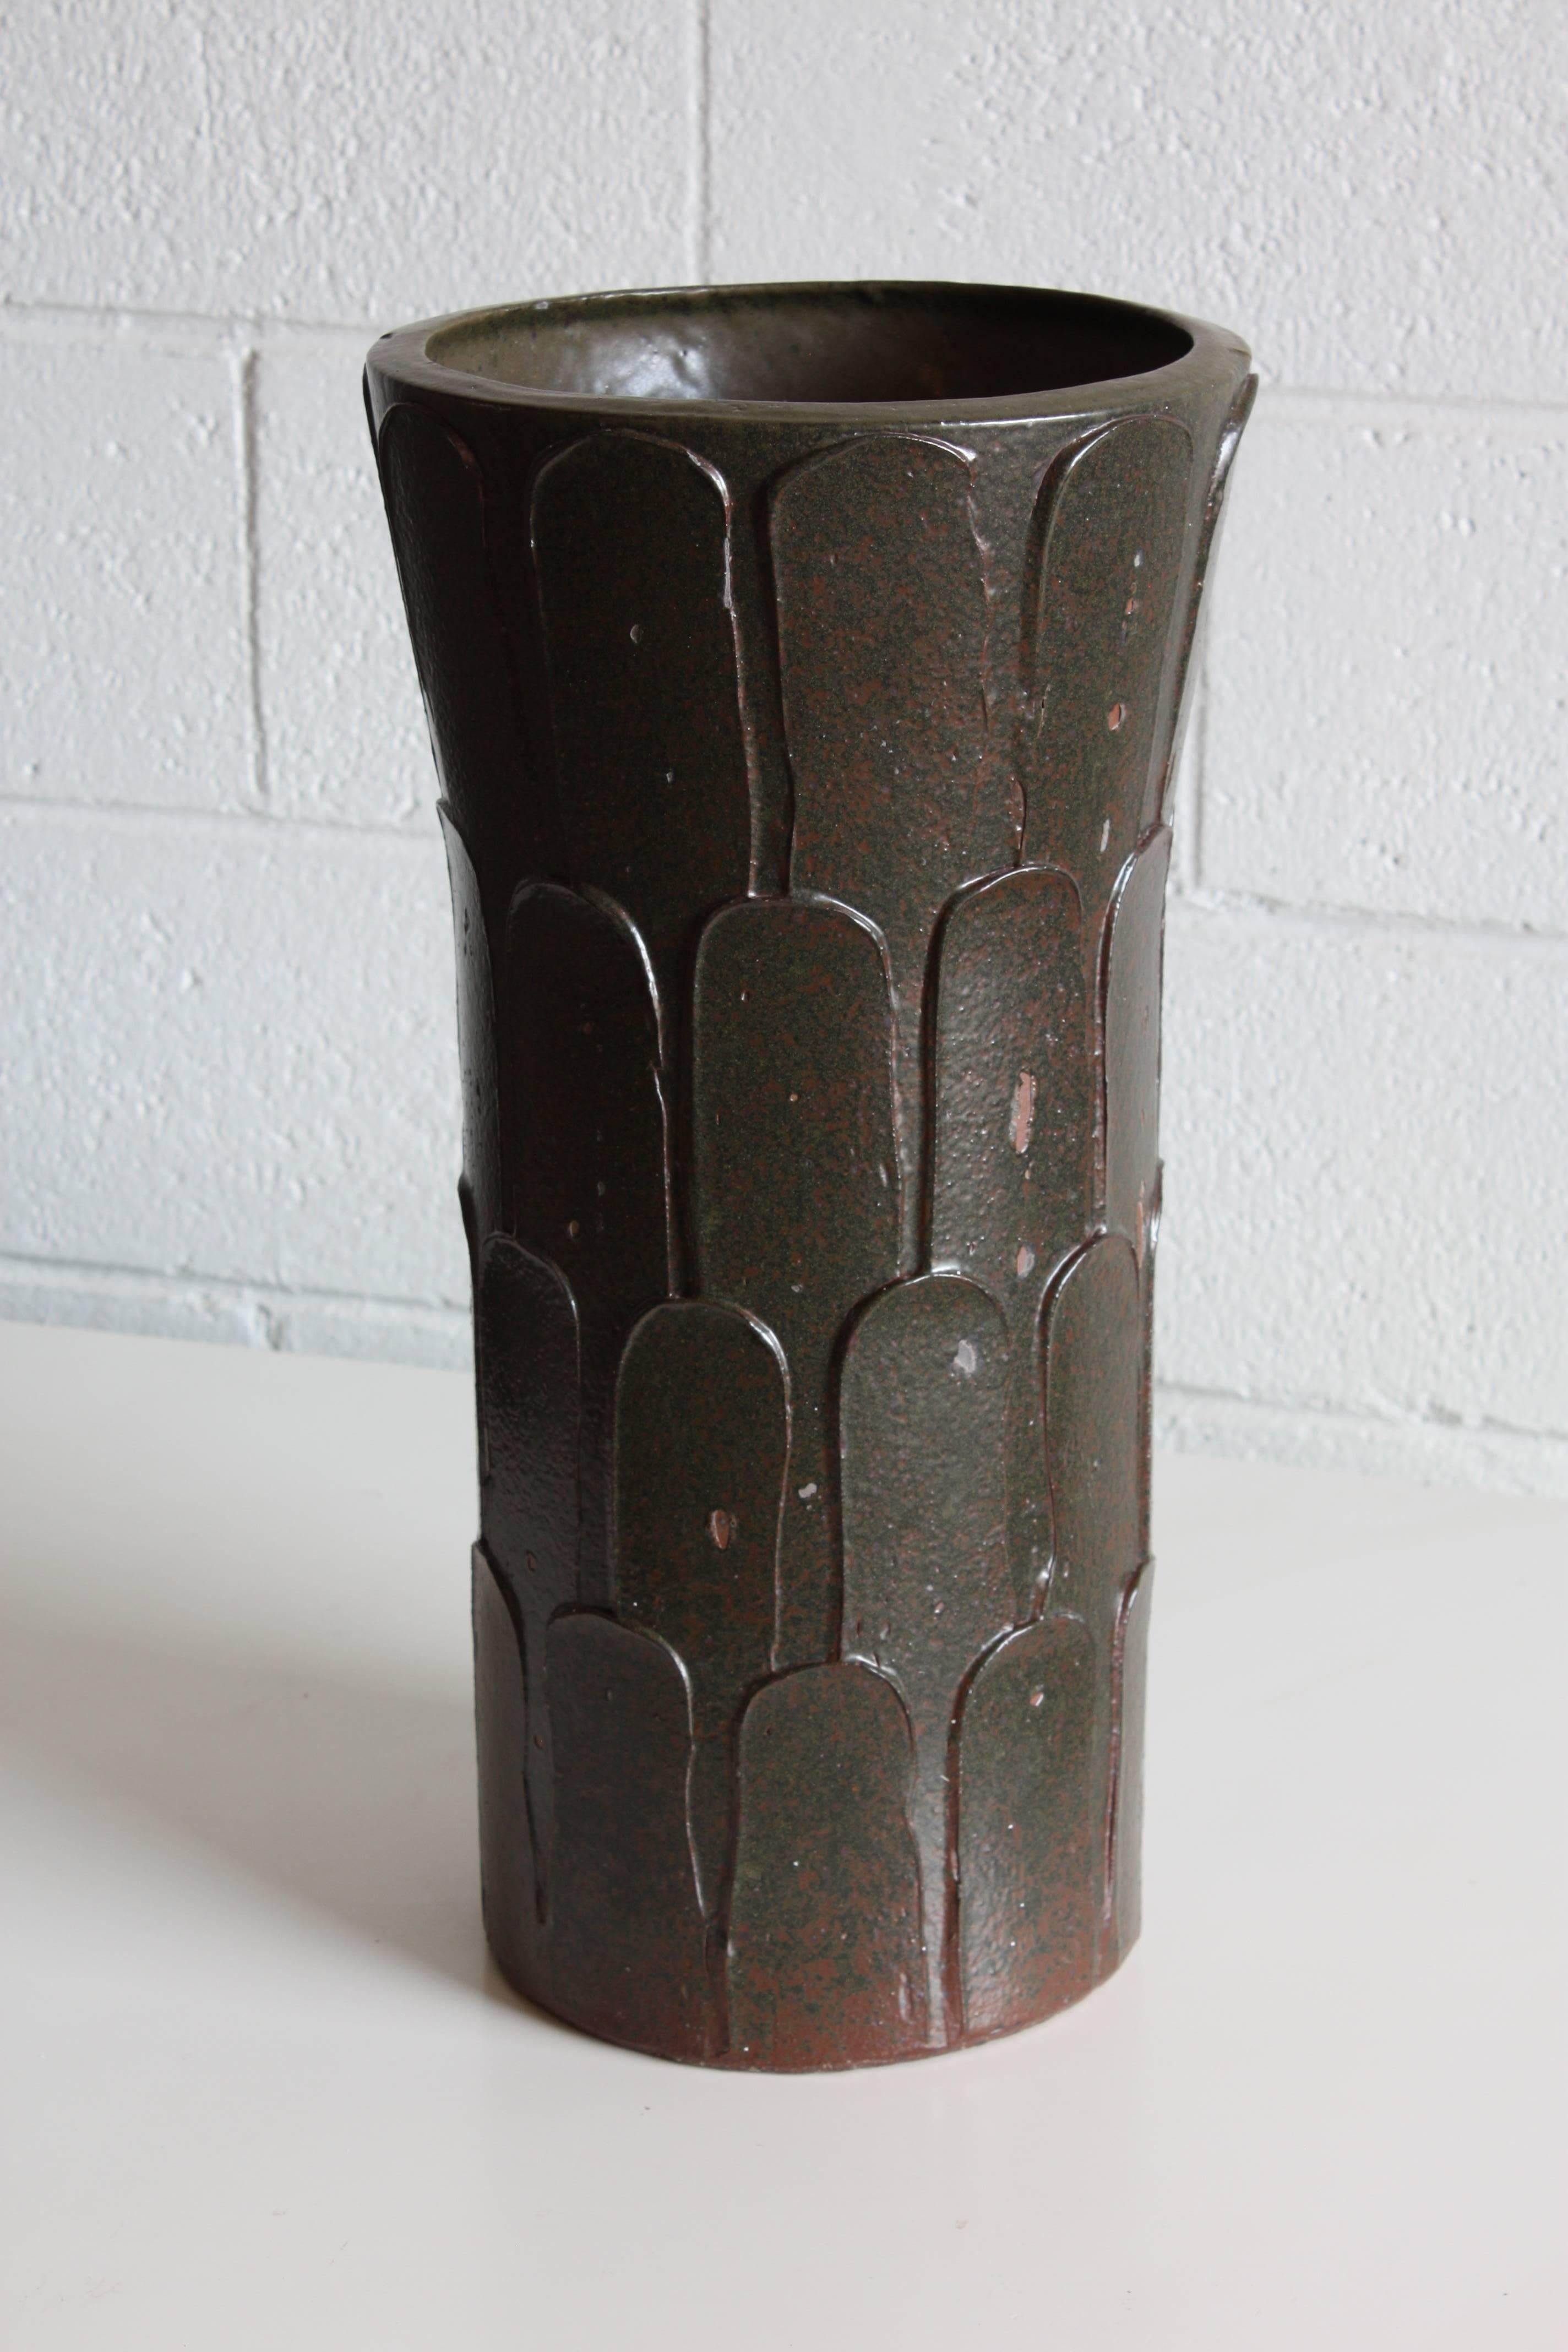 Mid-Century Modern Umbrella Stand or Pot by David Cressey for Architectural Pottery